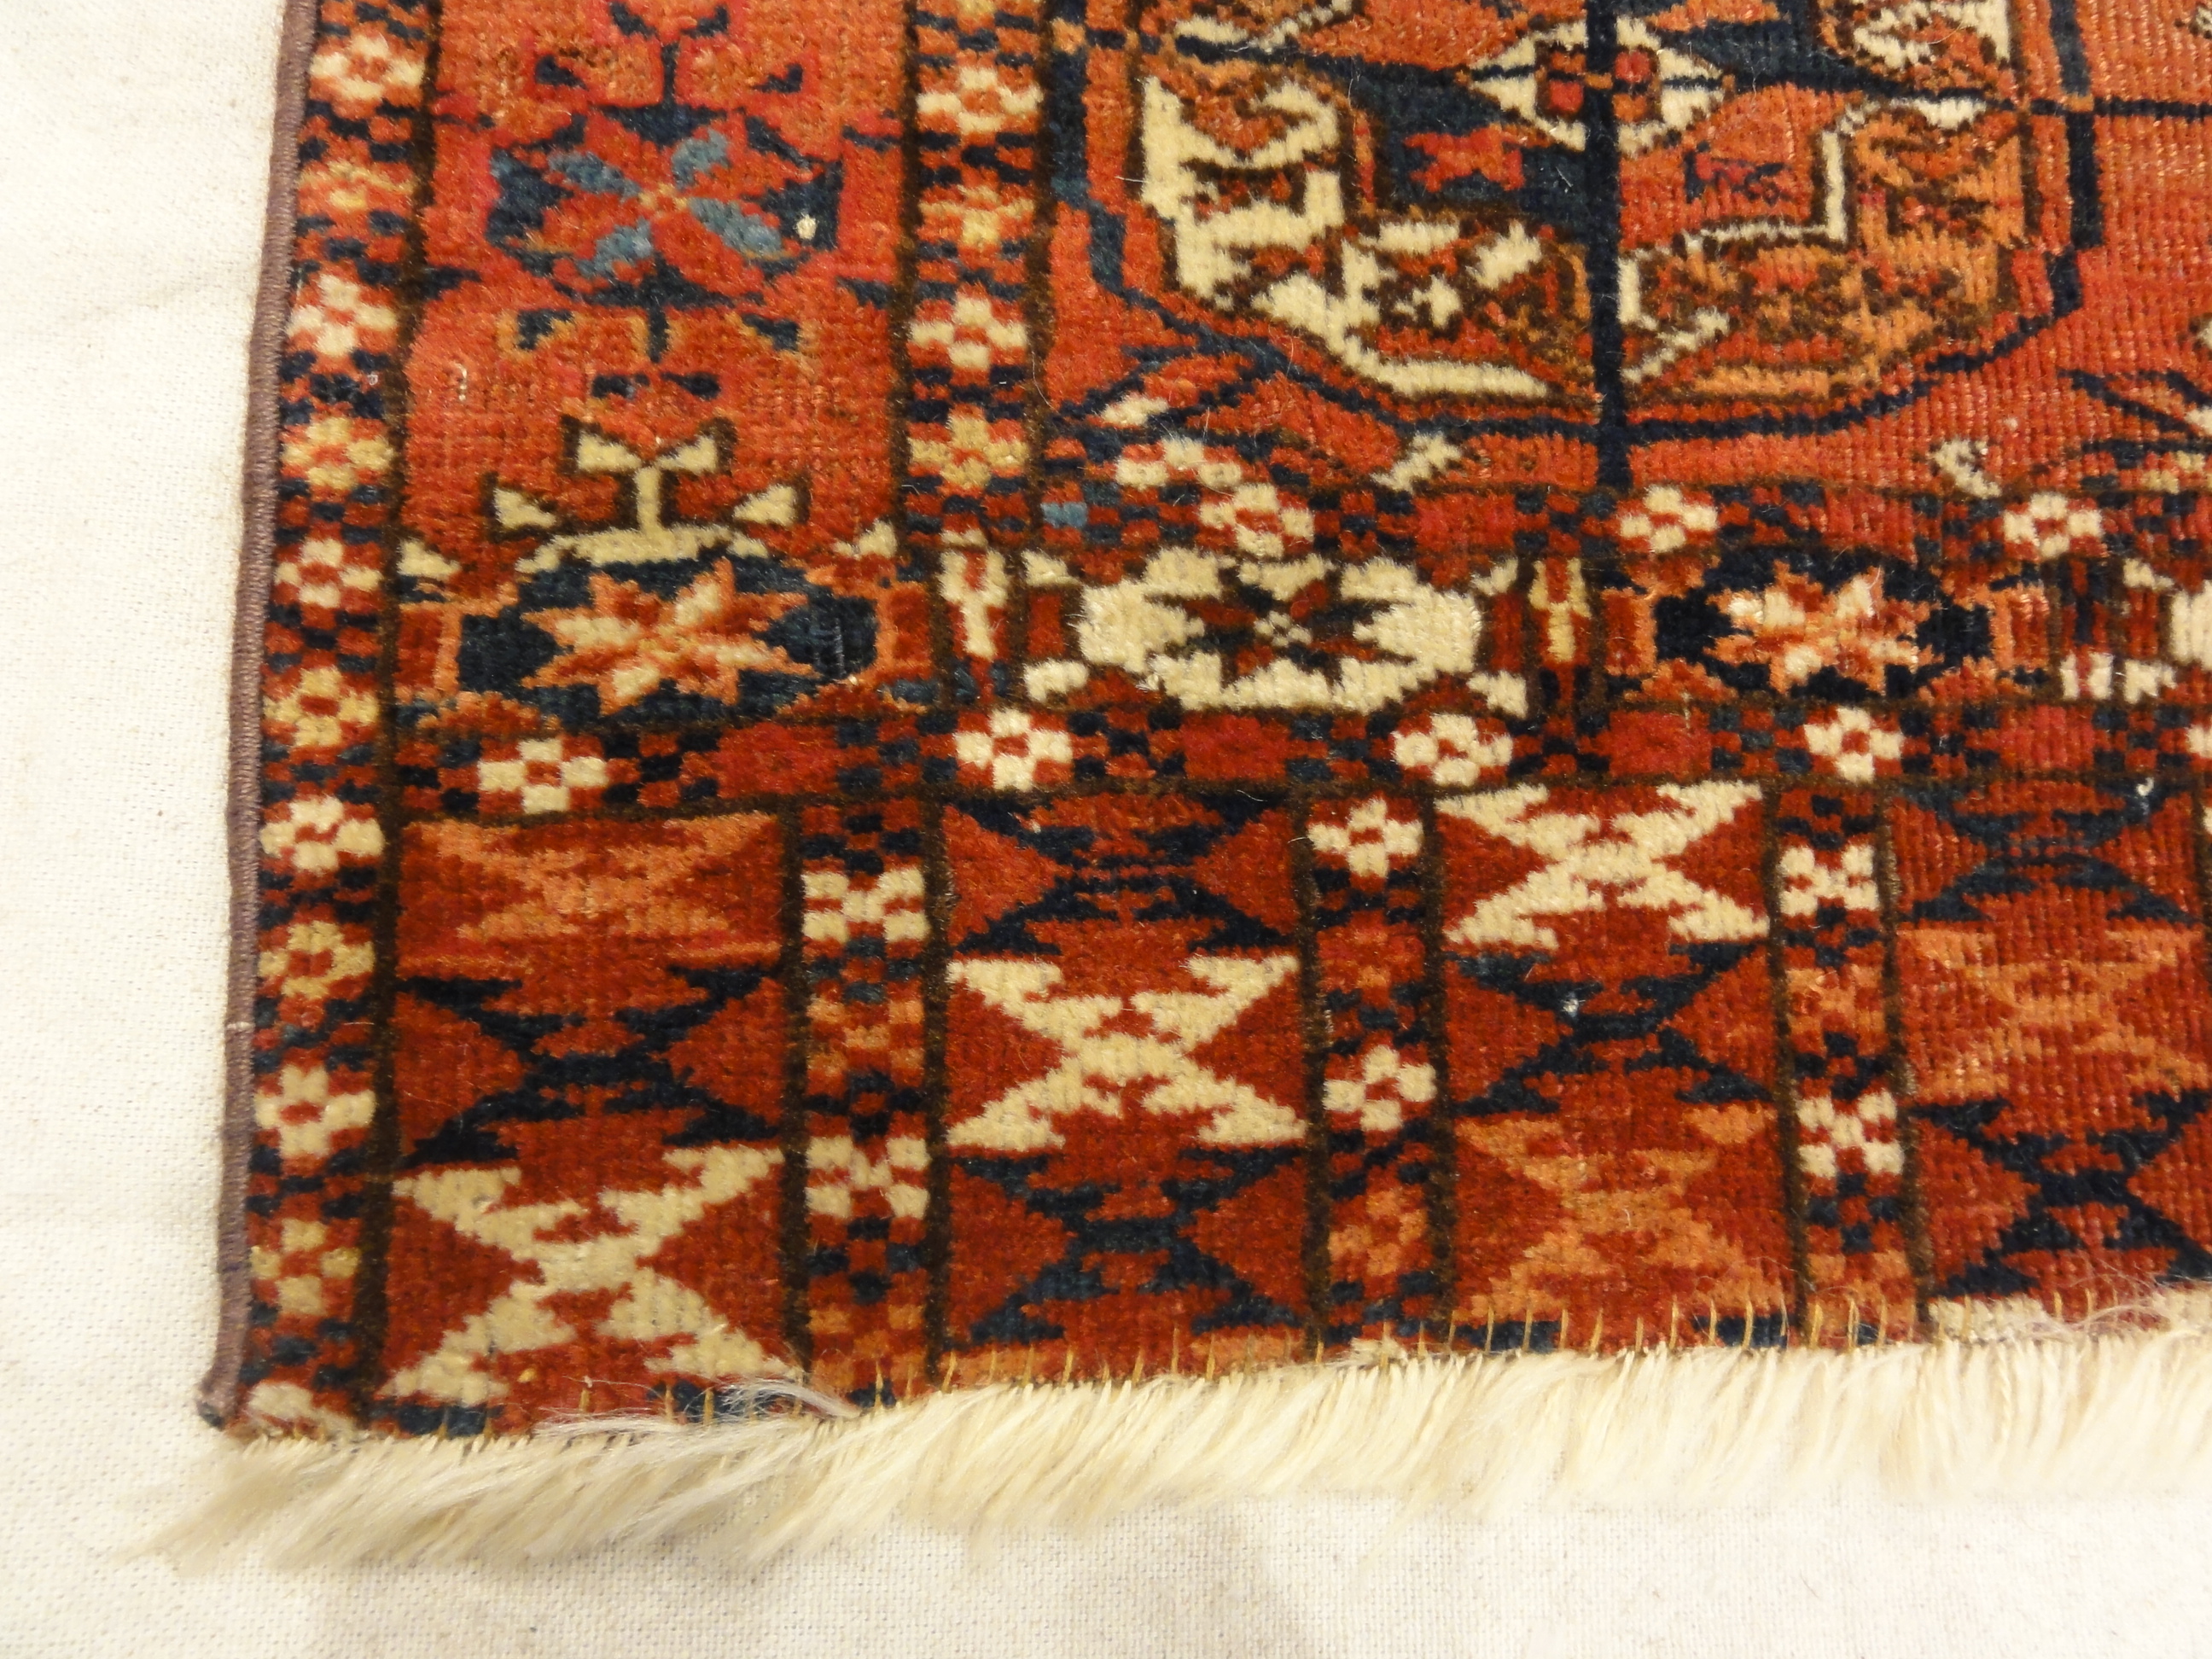 Fine Antique Tekke Bukhara Rug. A piece of genuine authentic woven carpet art sold by the Santa Barbara Design Center Rugs and More.